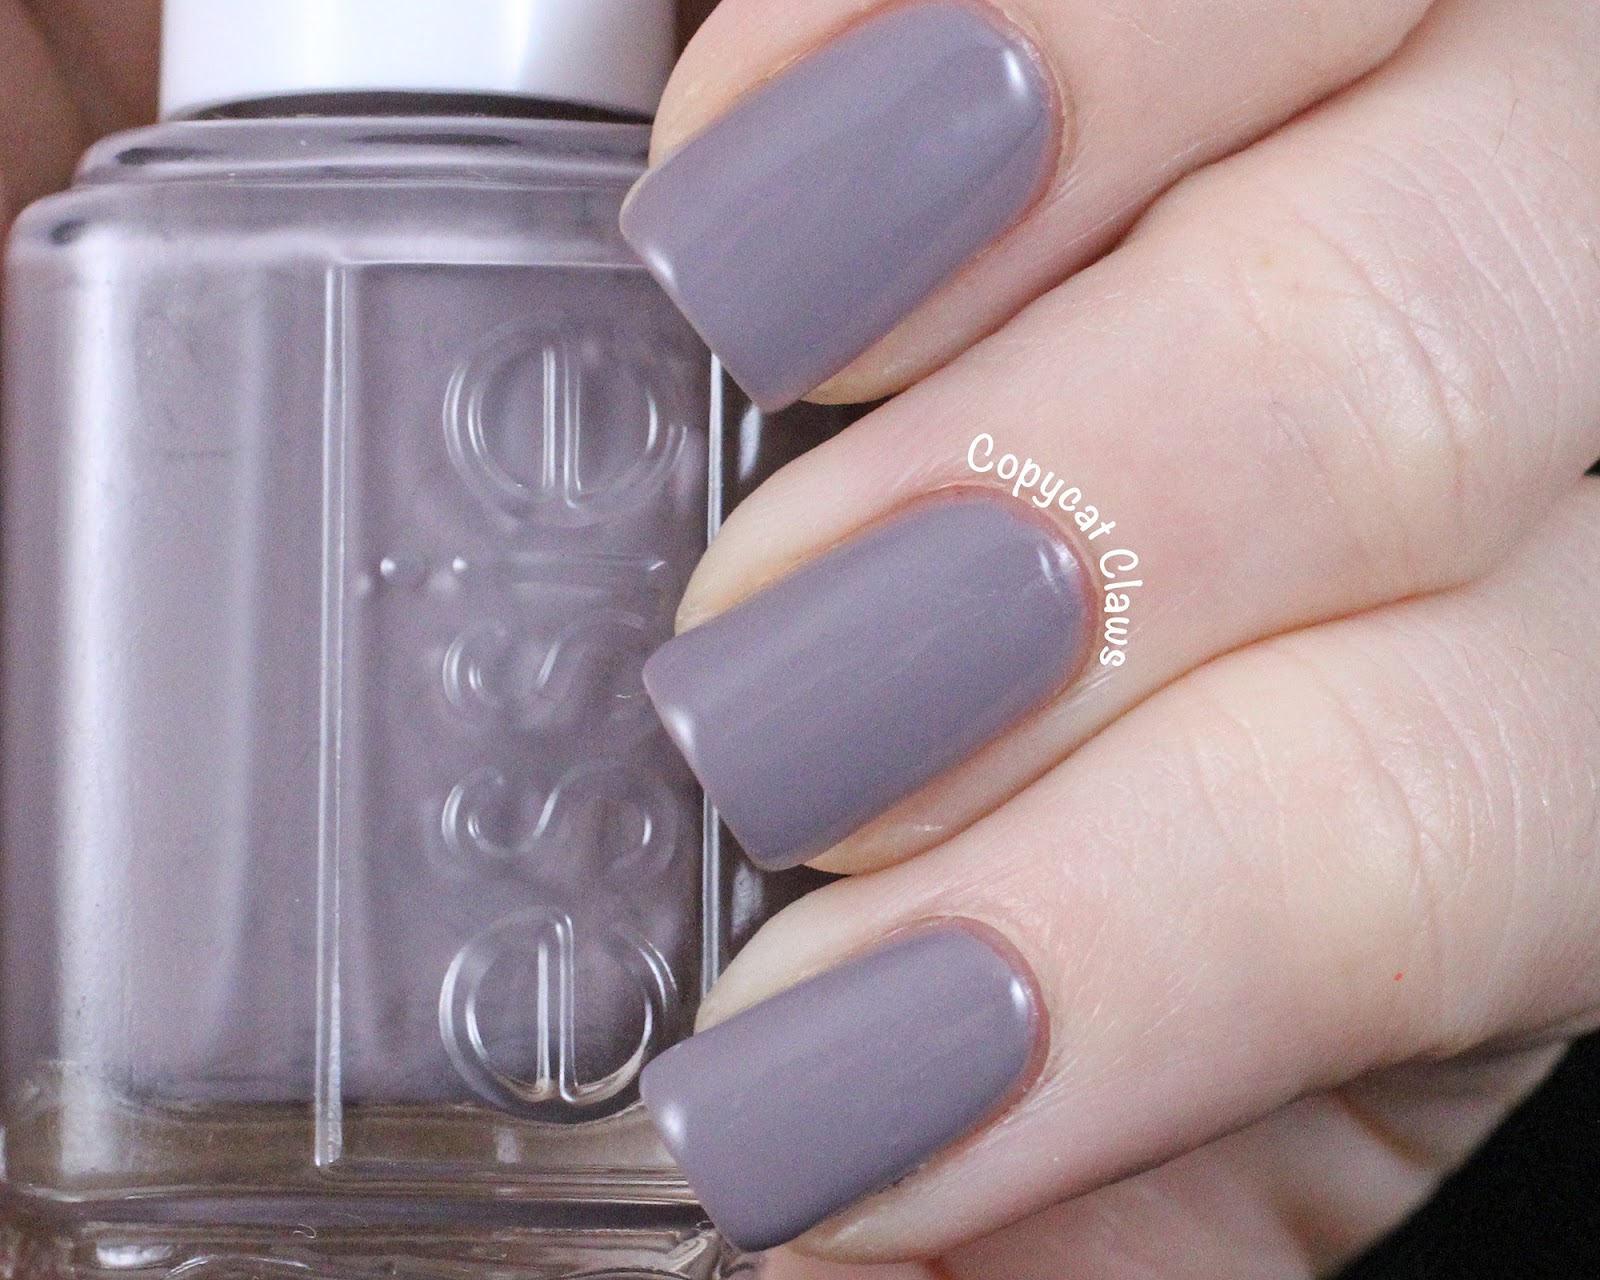 2. Essie Nail Polish in "Chinchilly" - wide 9